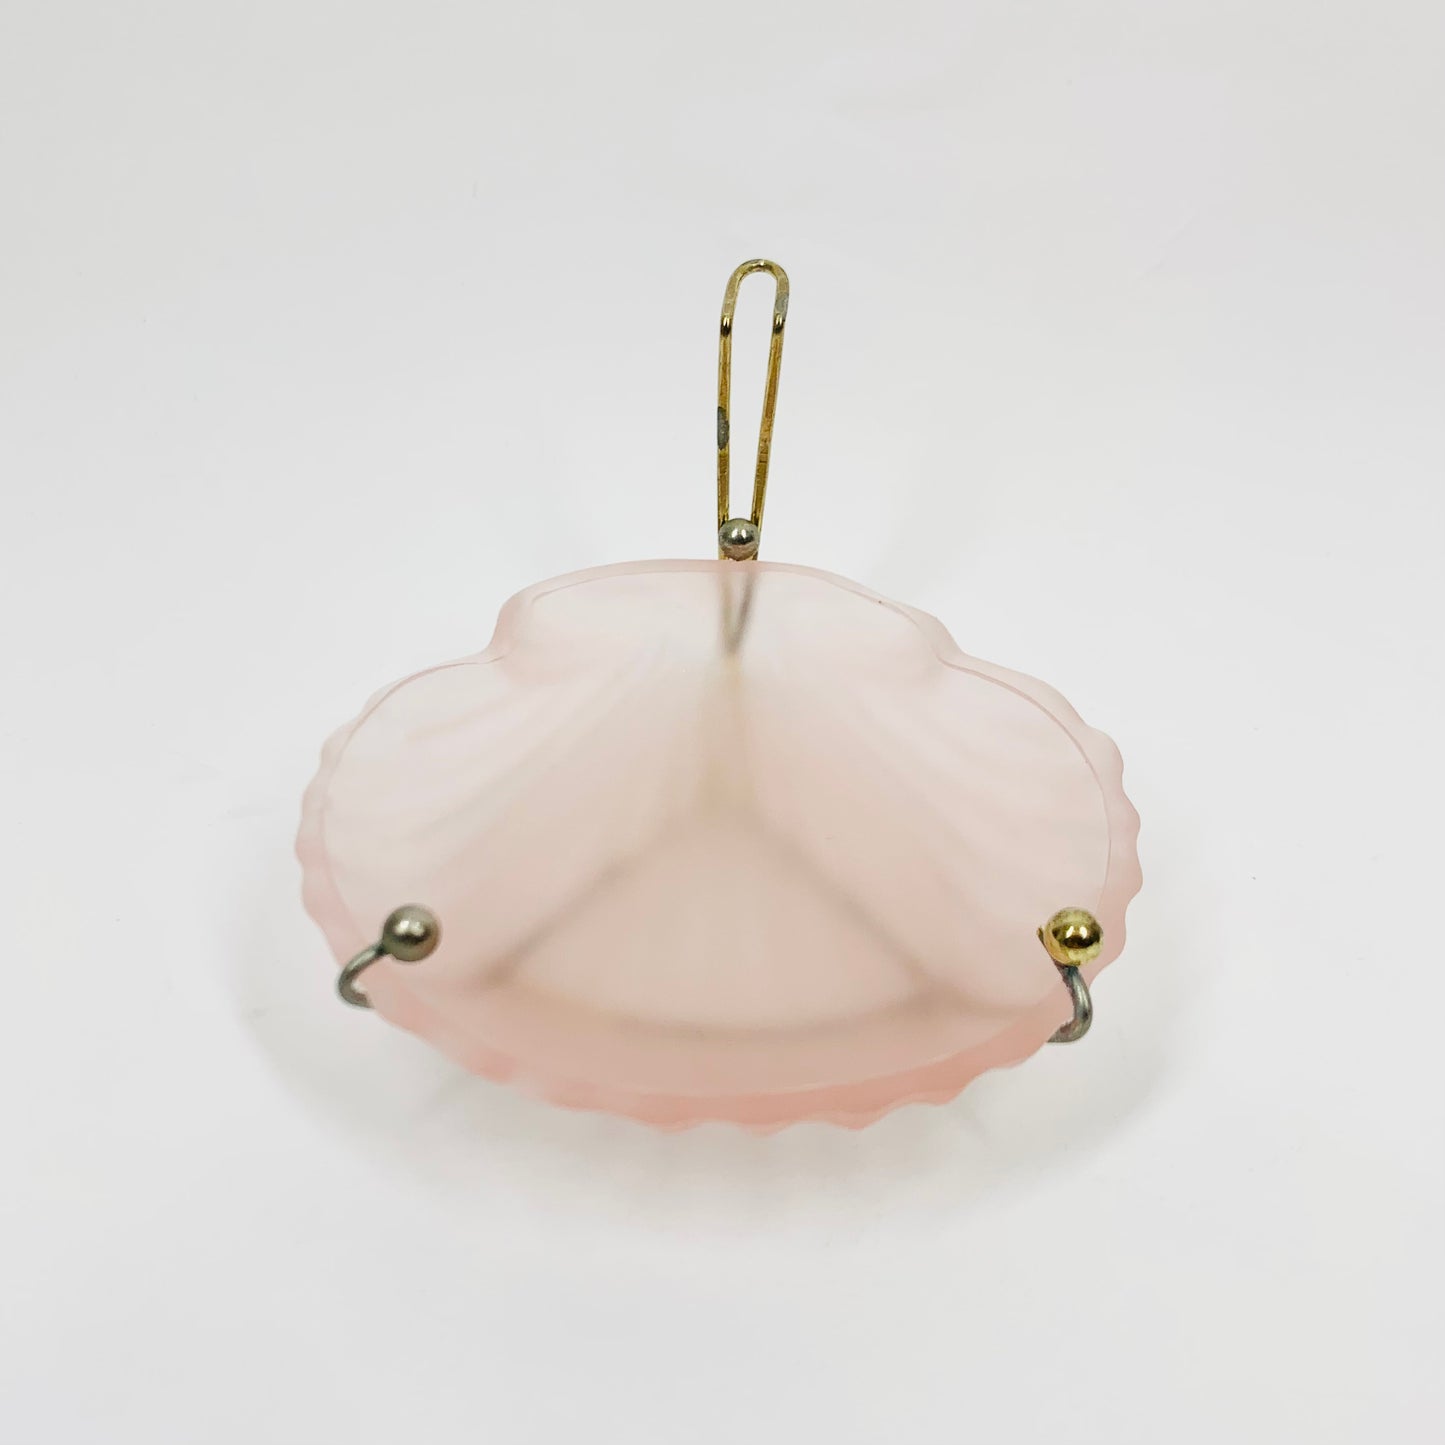 Extremely rare antique Art Deco pink satin glass shell pin dish